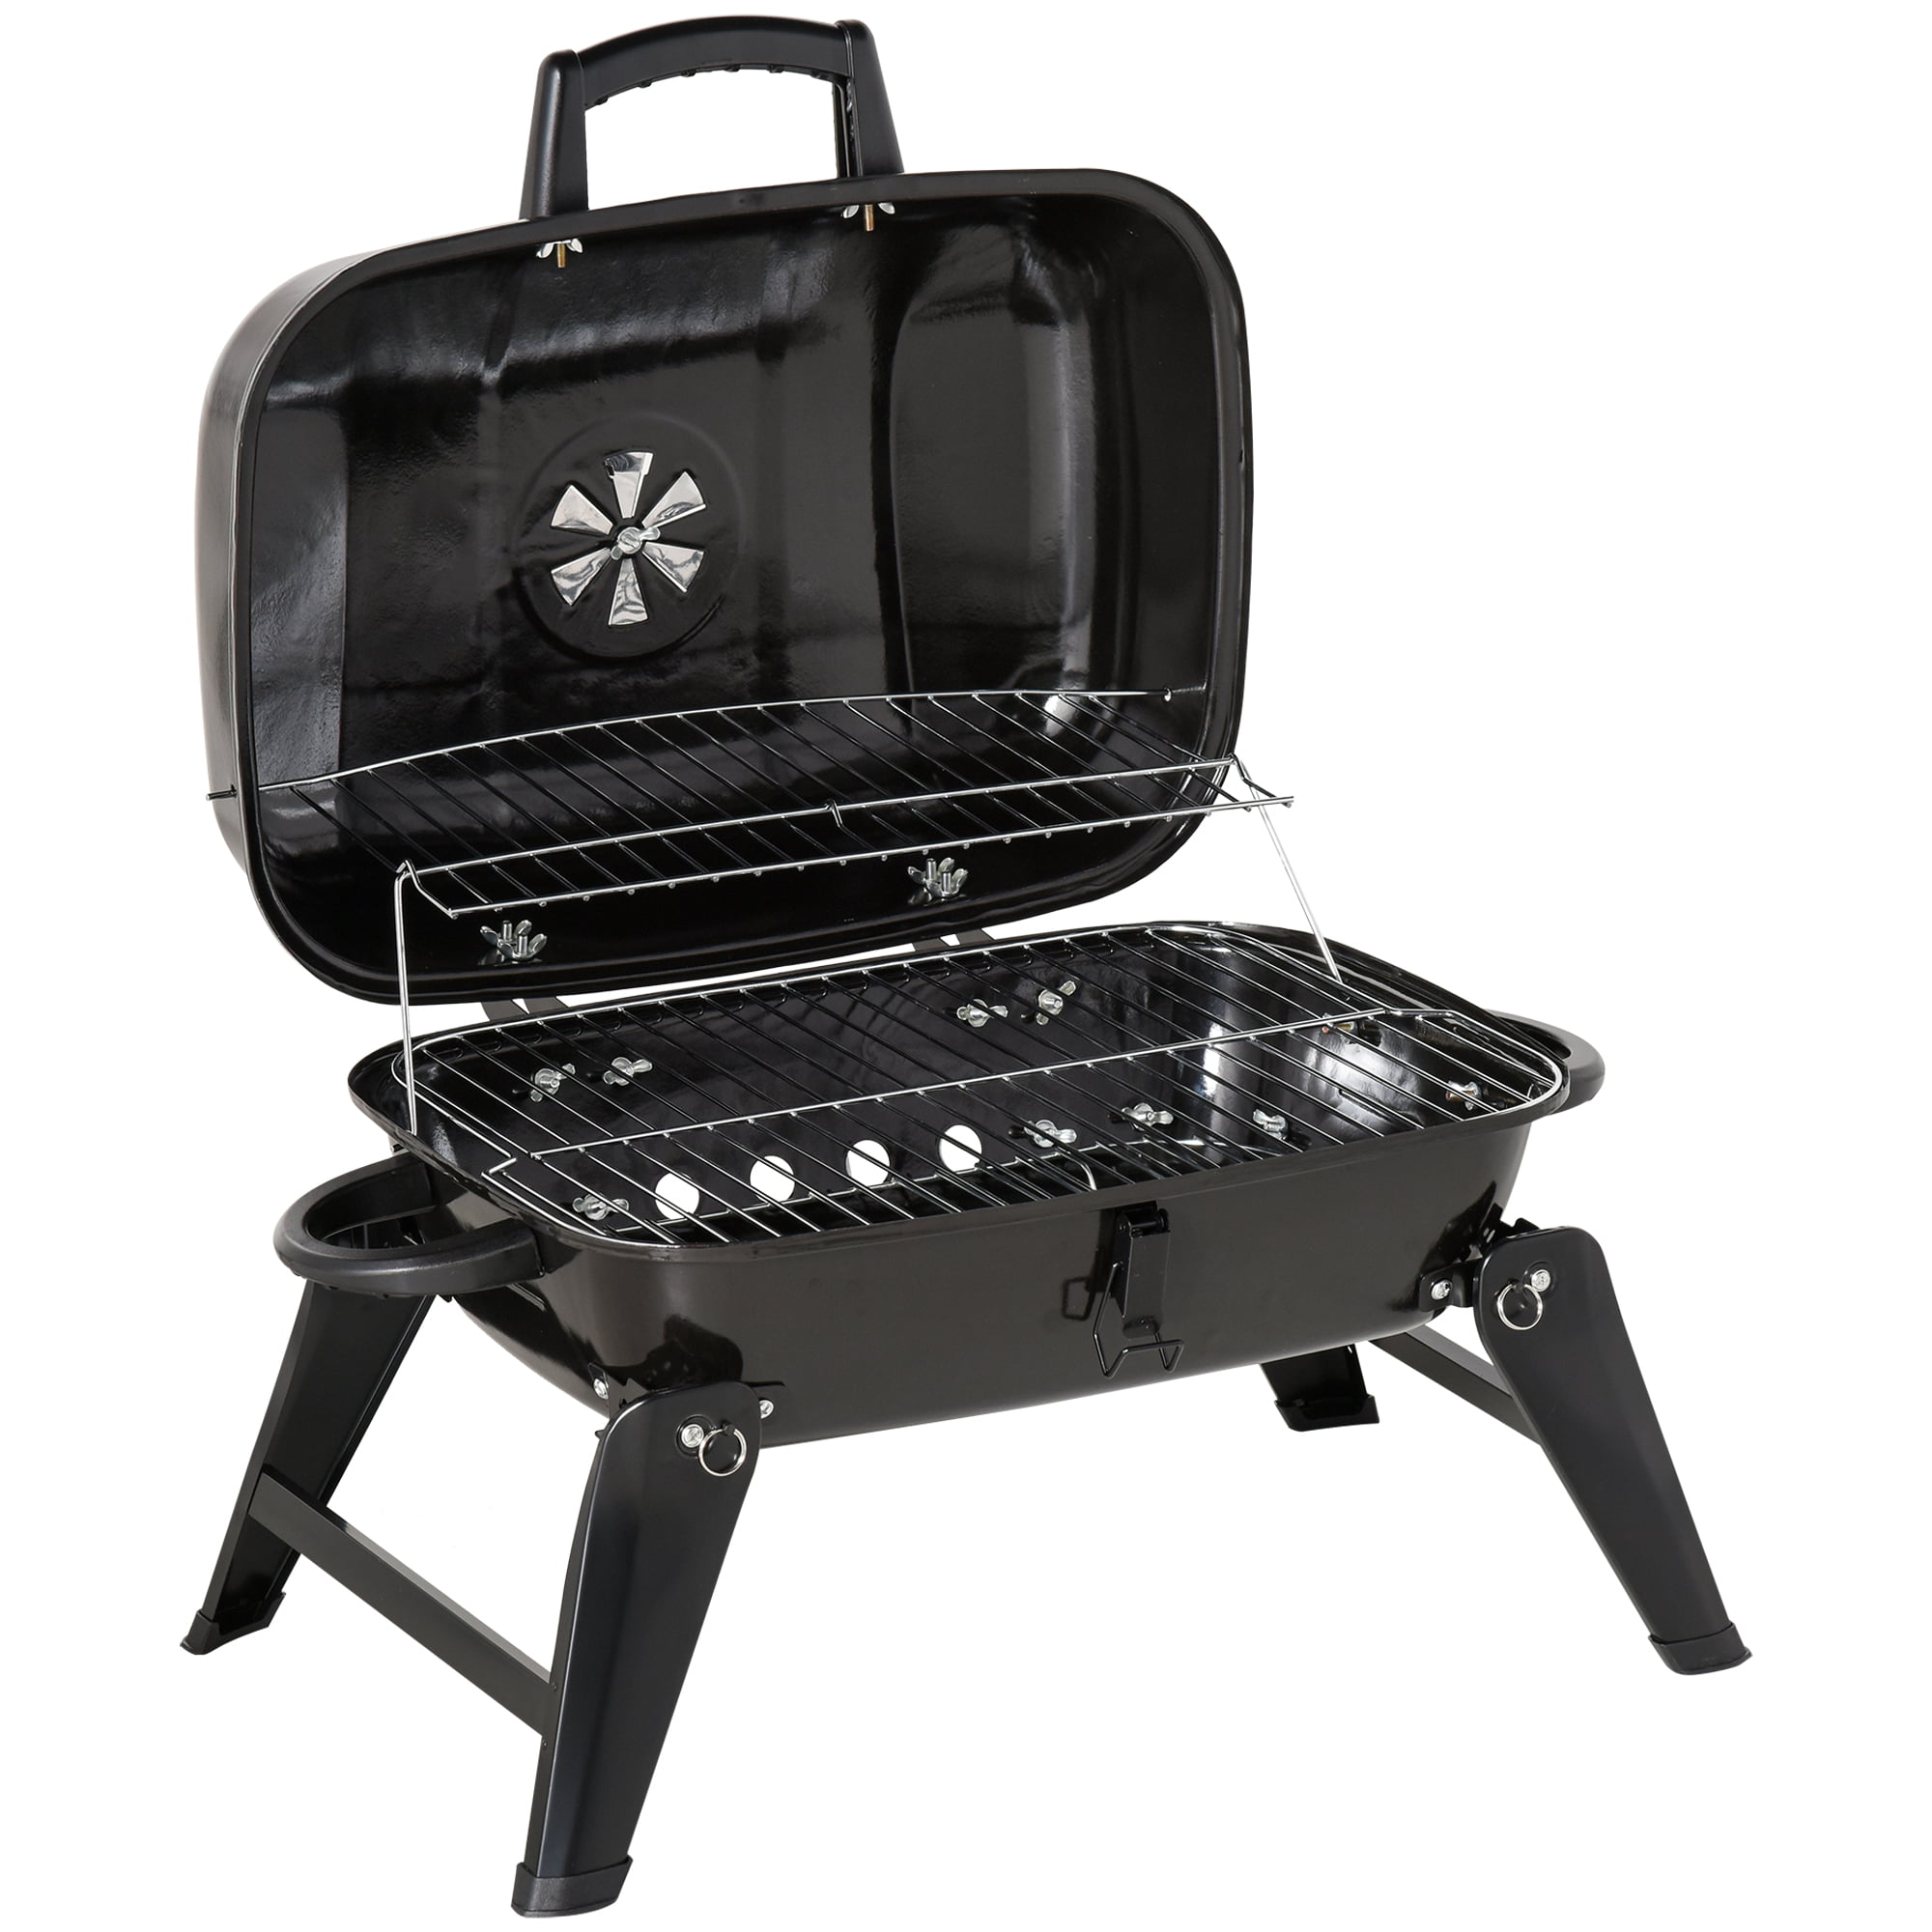 HomeyMosaic 19 Steel Porcelain Portable Outdoor Charcoal Barbecue Grill Hamburger Grill Commercial Machine Square BBQ Grill,YH19022 Black